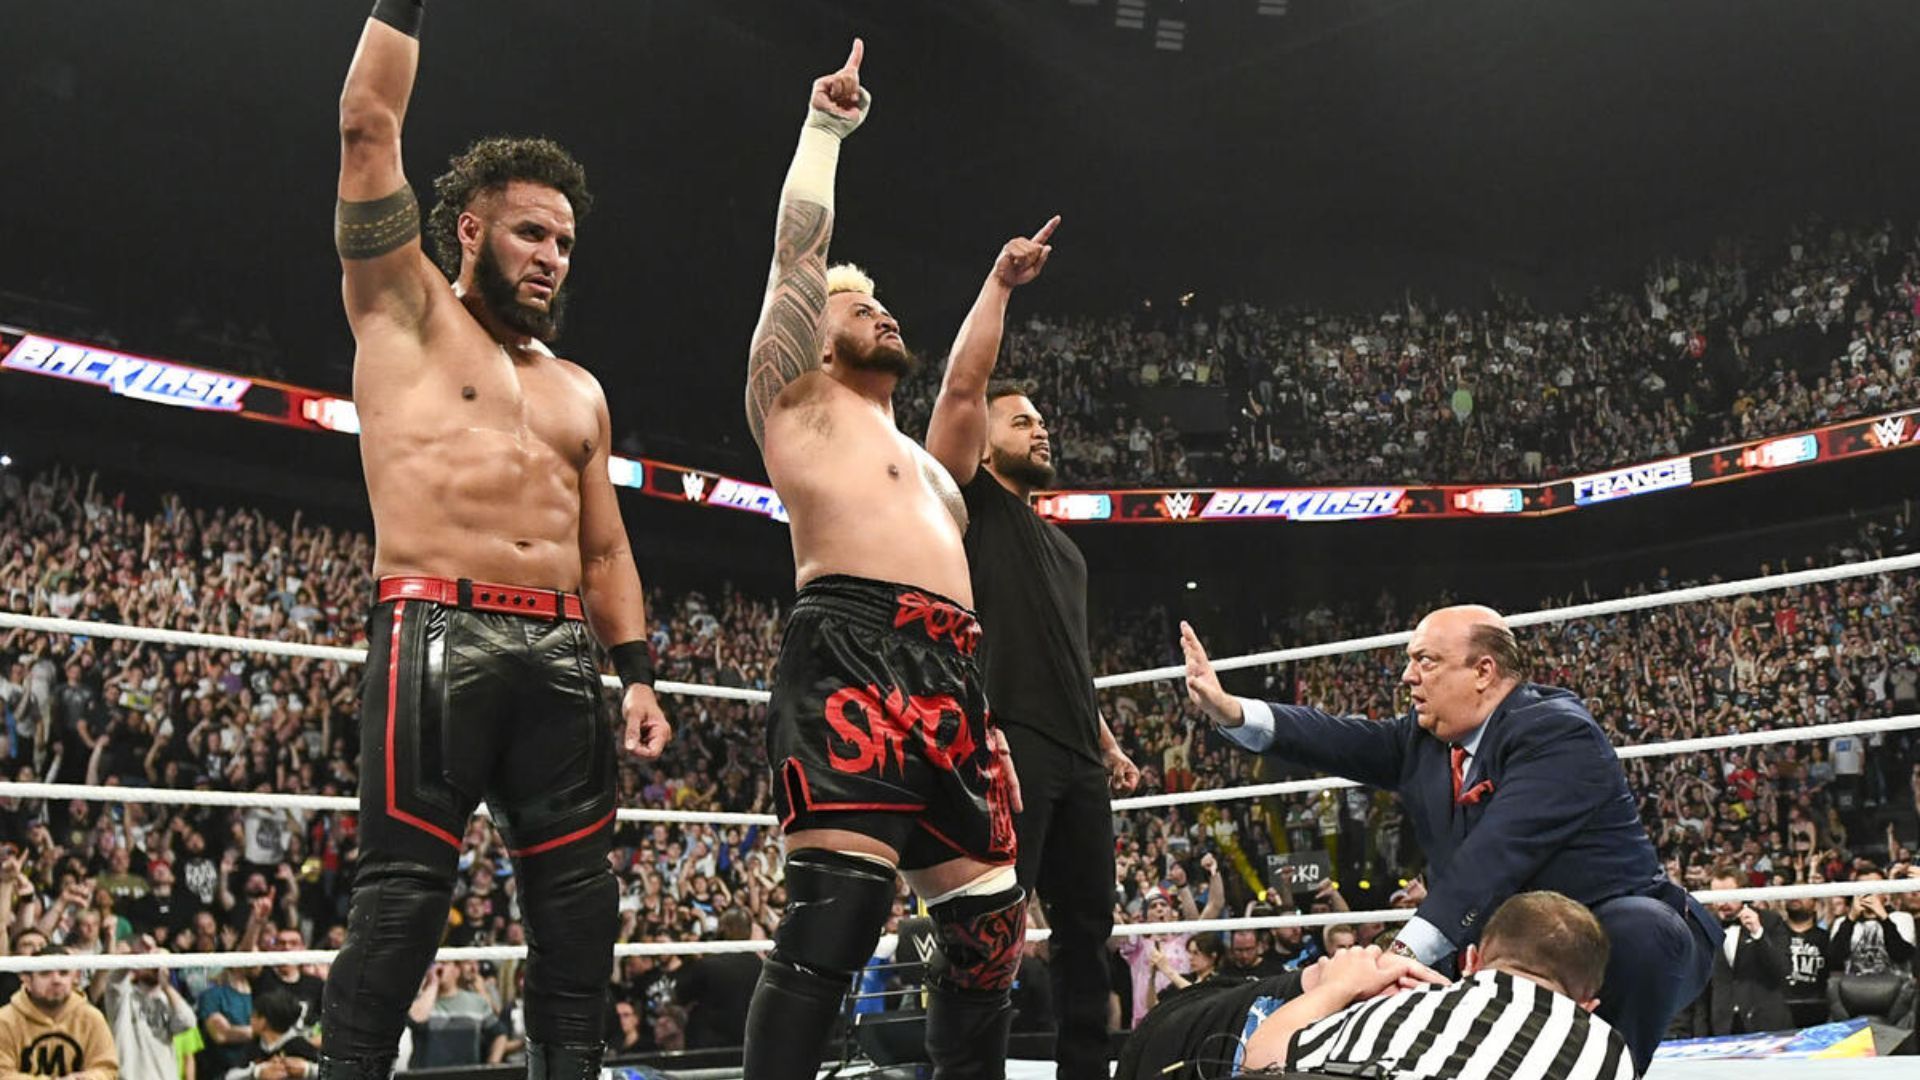 Will the Bloodline climb back to the top in WWE?